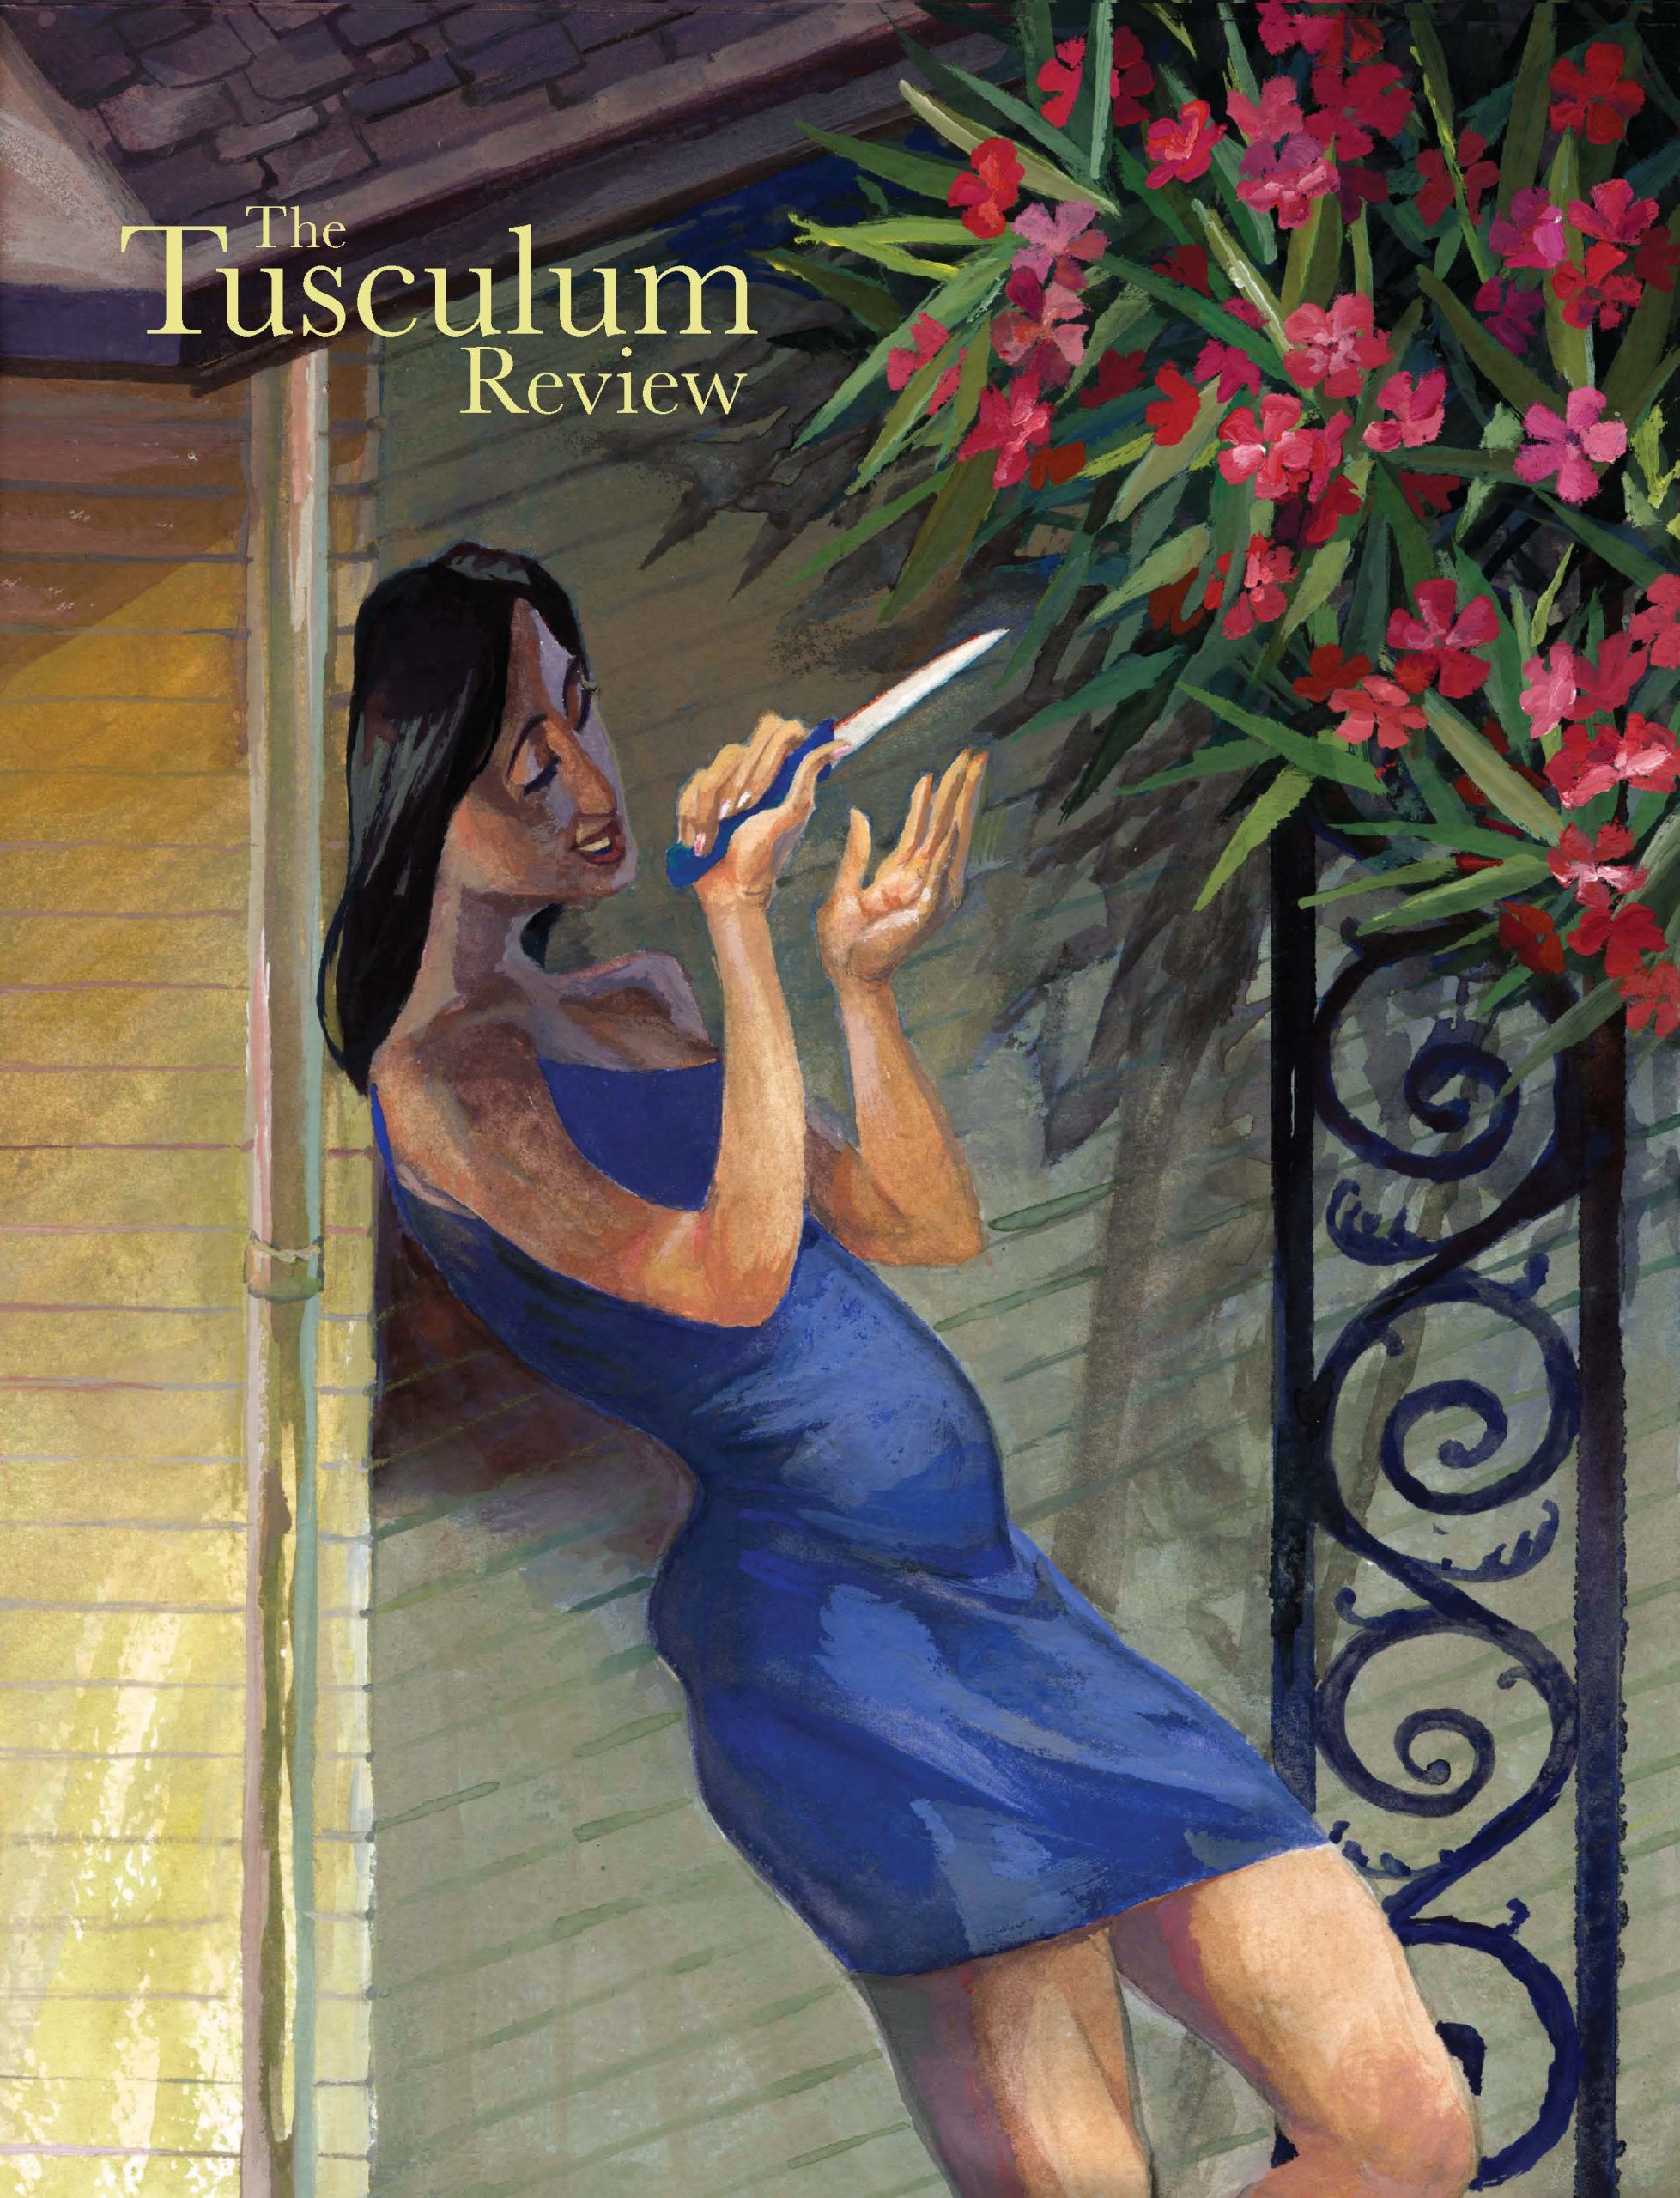 The Tusculum Review cover, Volume 18